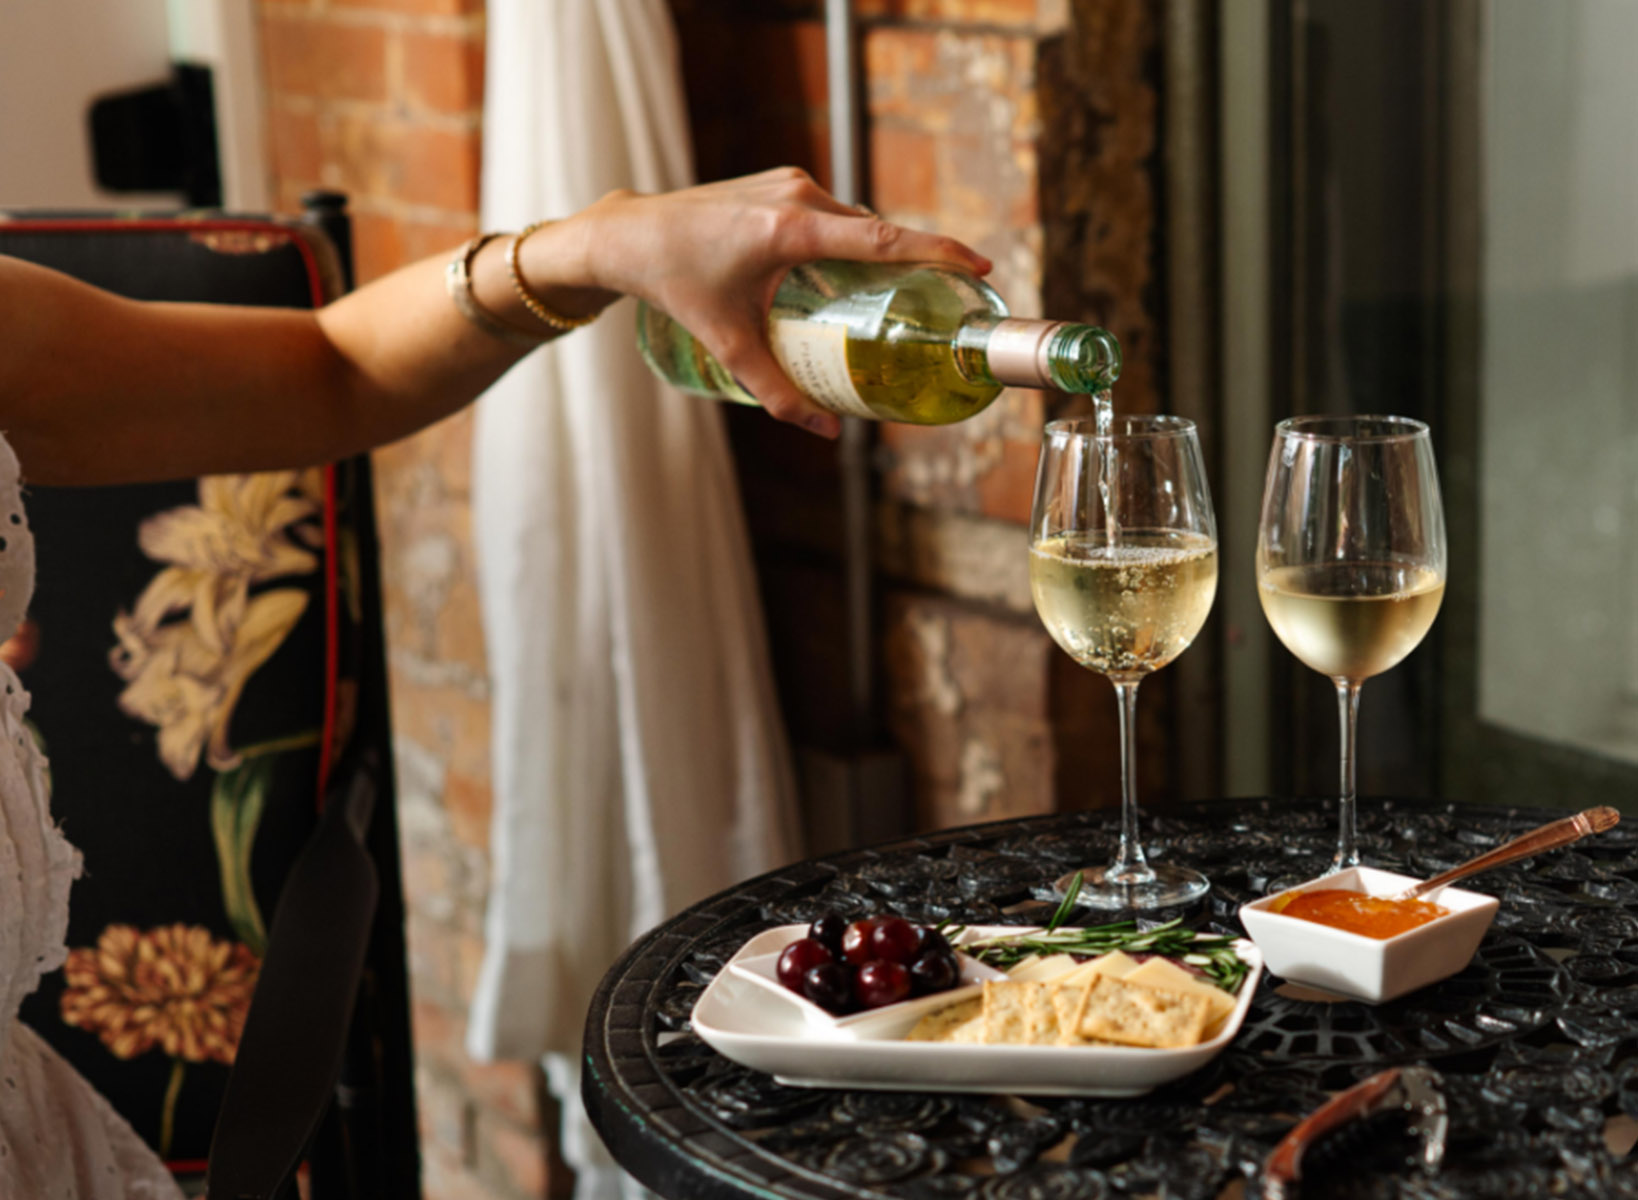 A hand pouring a glass of white wine into 2 wine glasses against a brick background. On the table with the wine glasses is a spread of crackers, cherries, and jam.